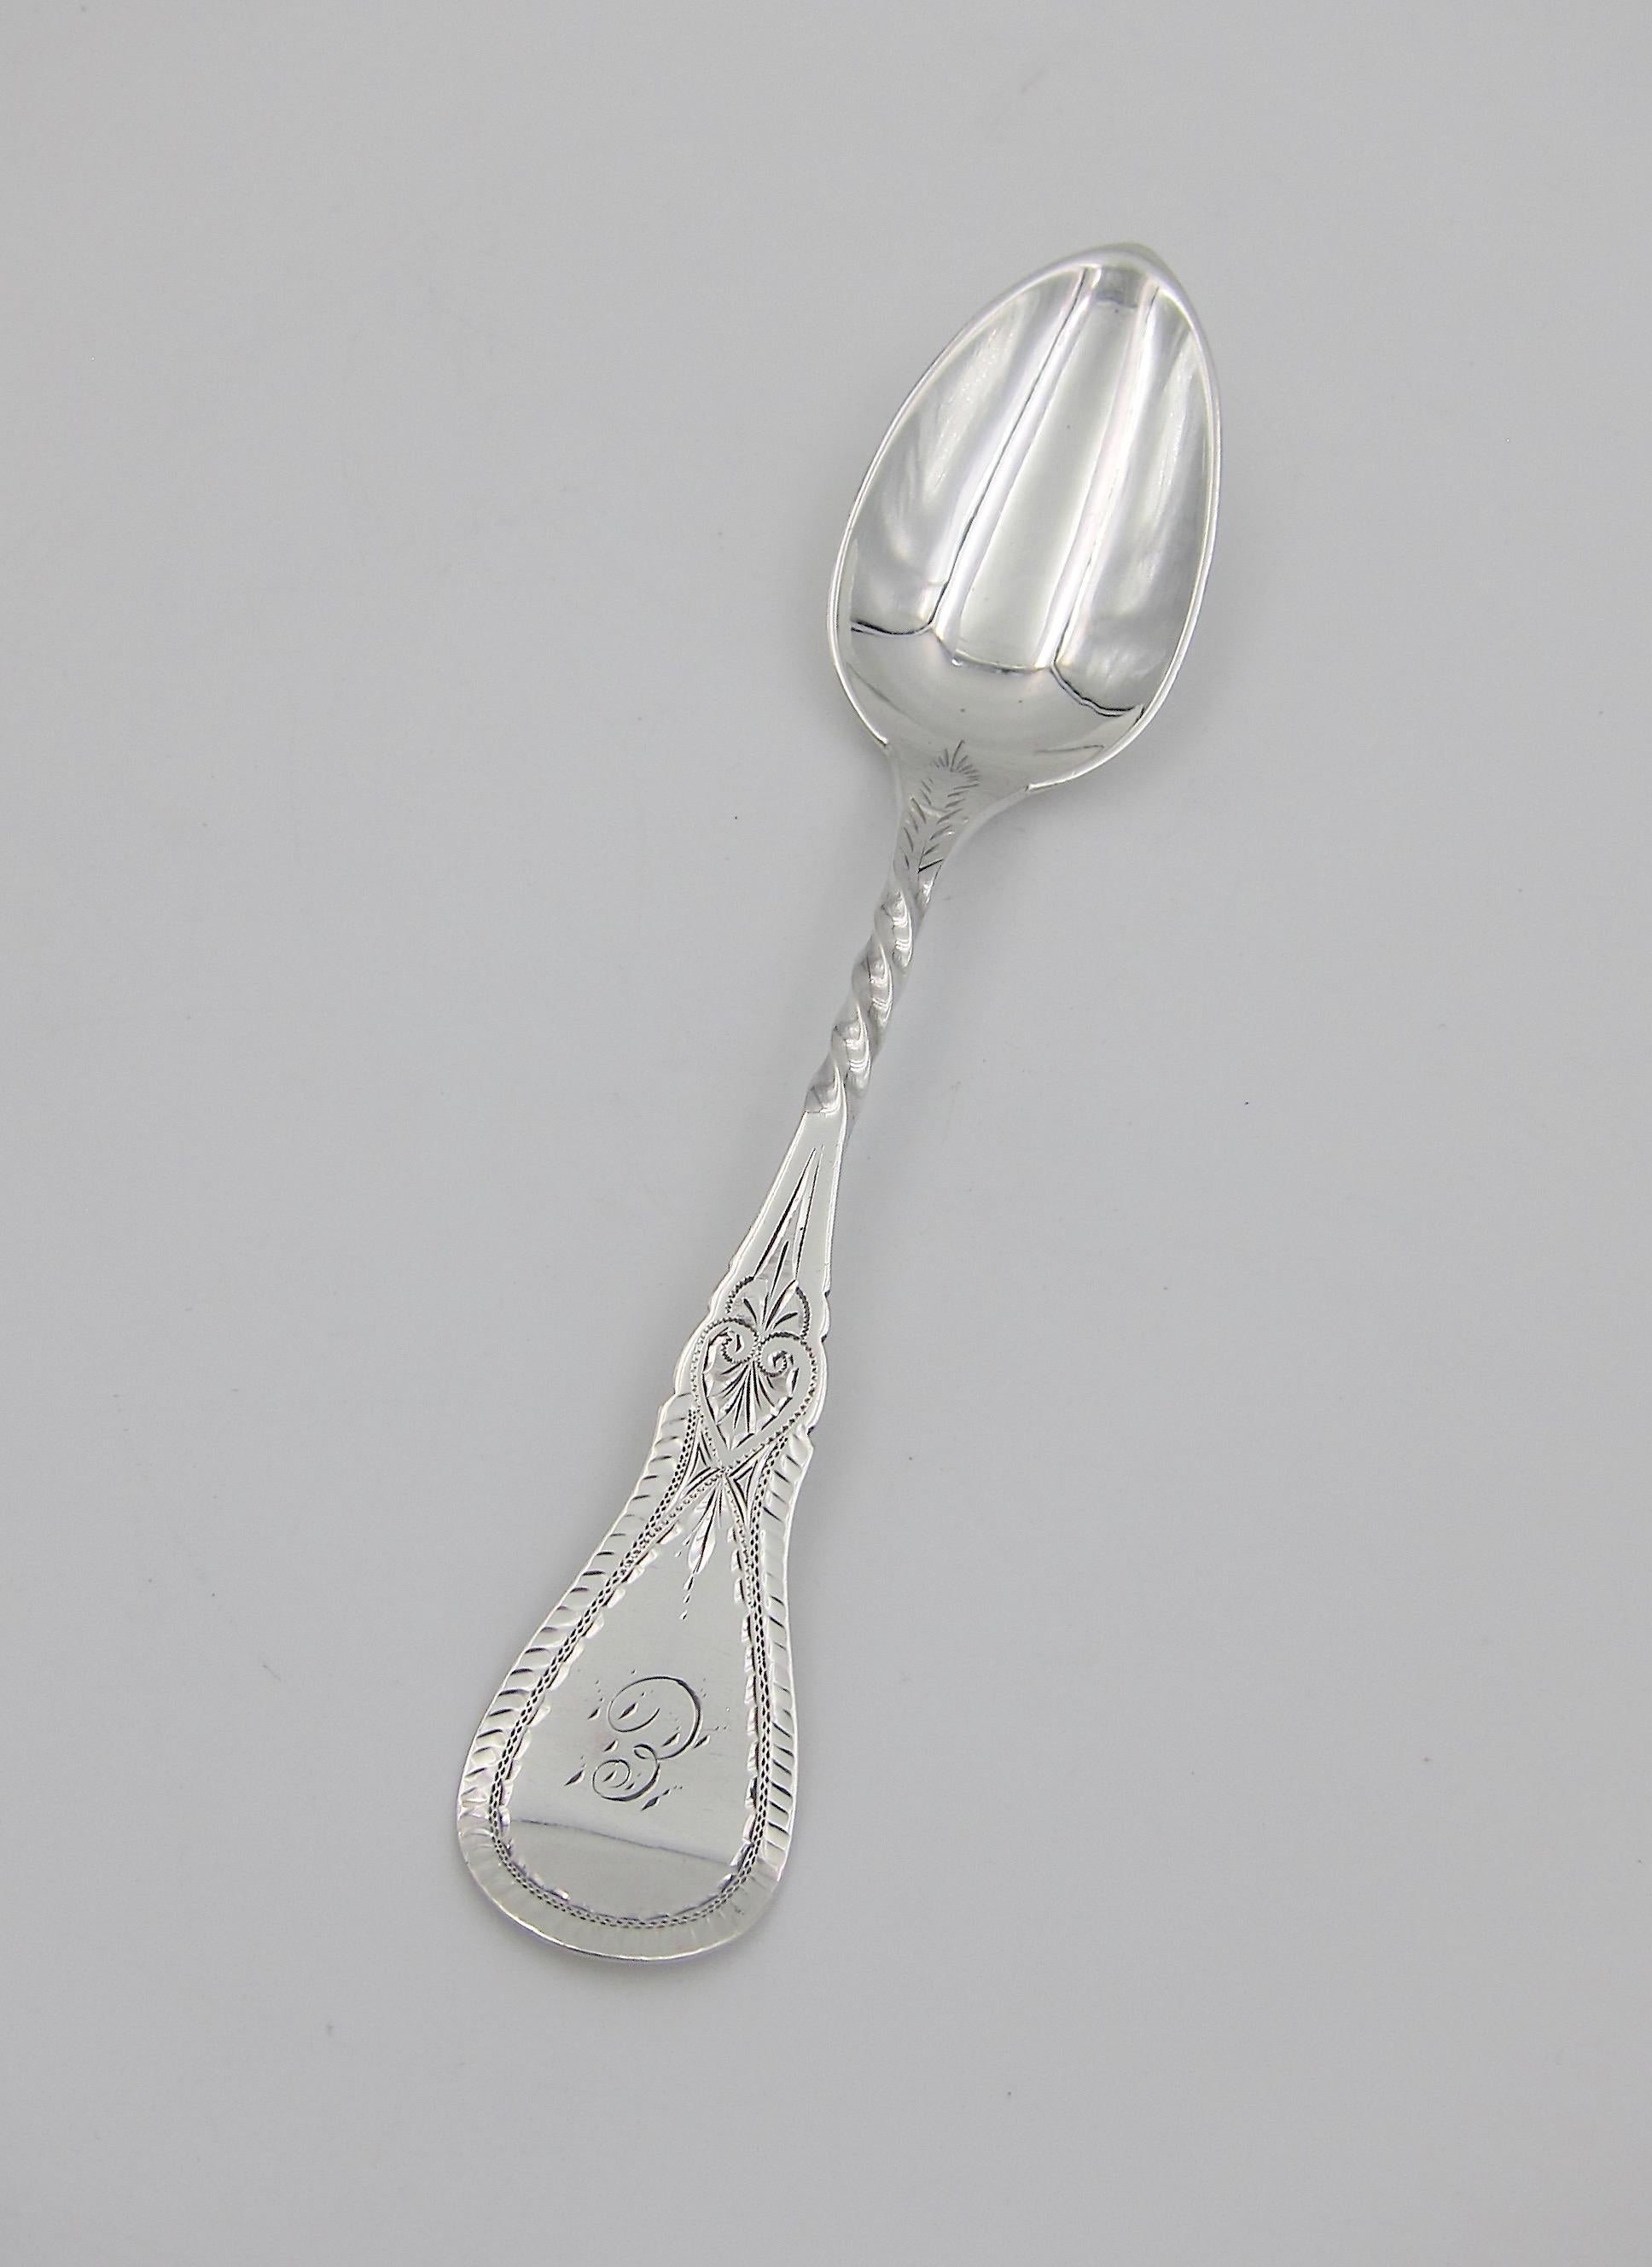 Antique American Coin Silver Spoon Set by James Watts of Philadelphia 1